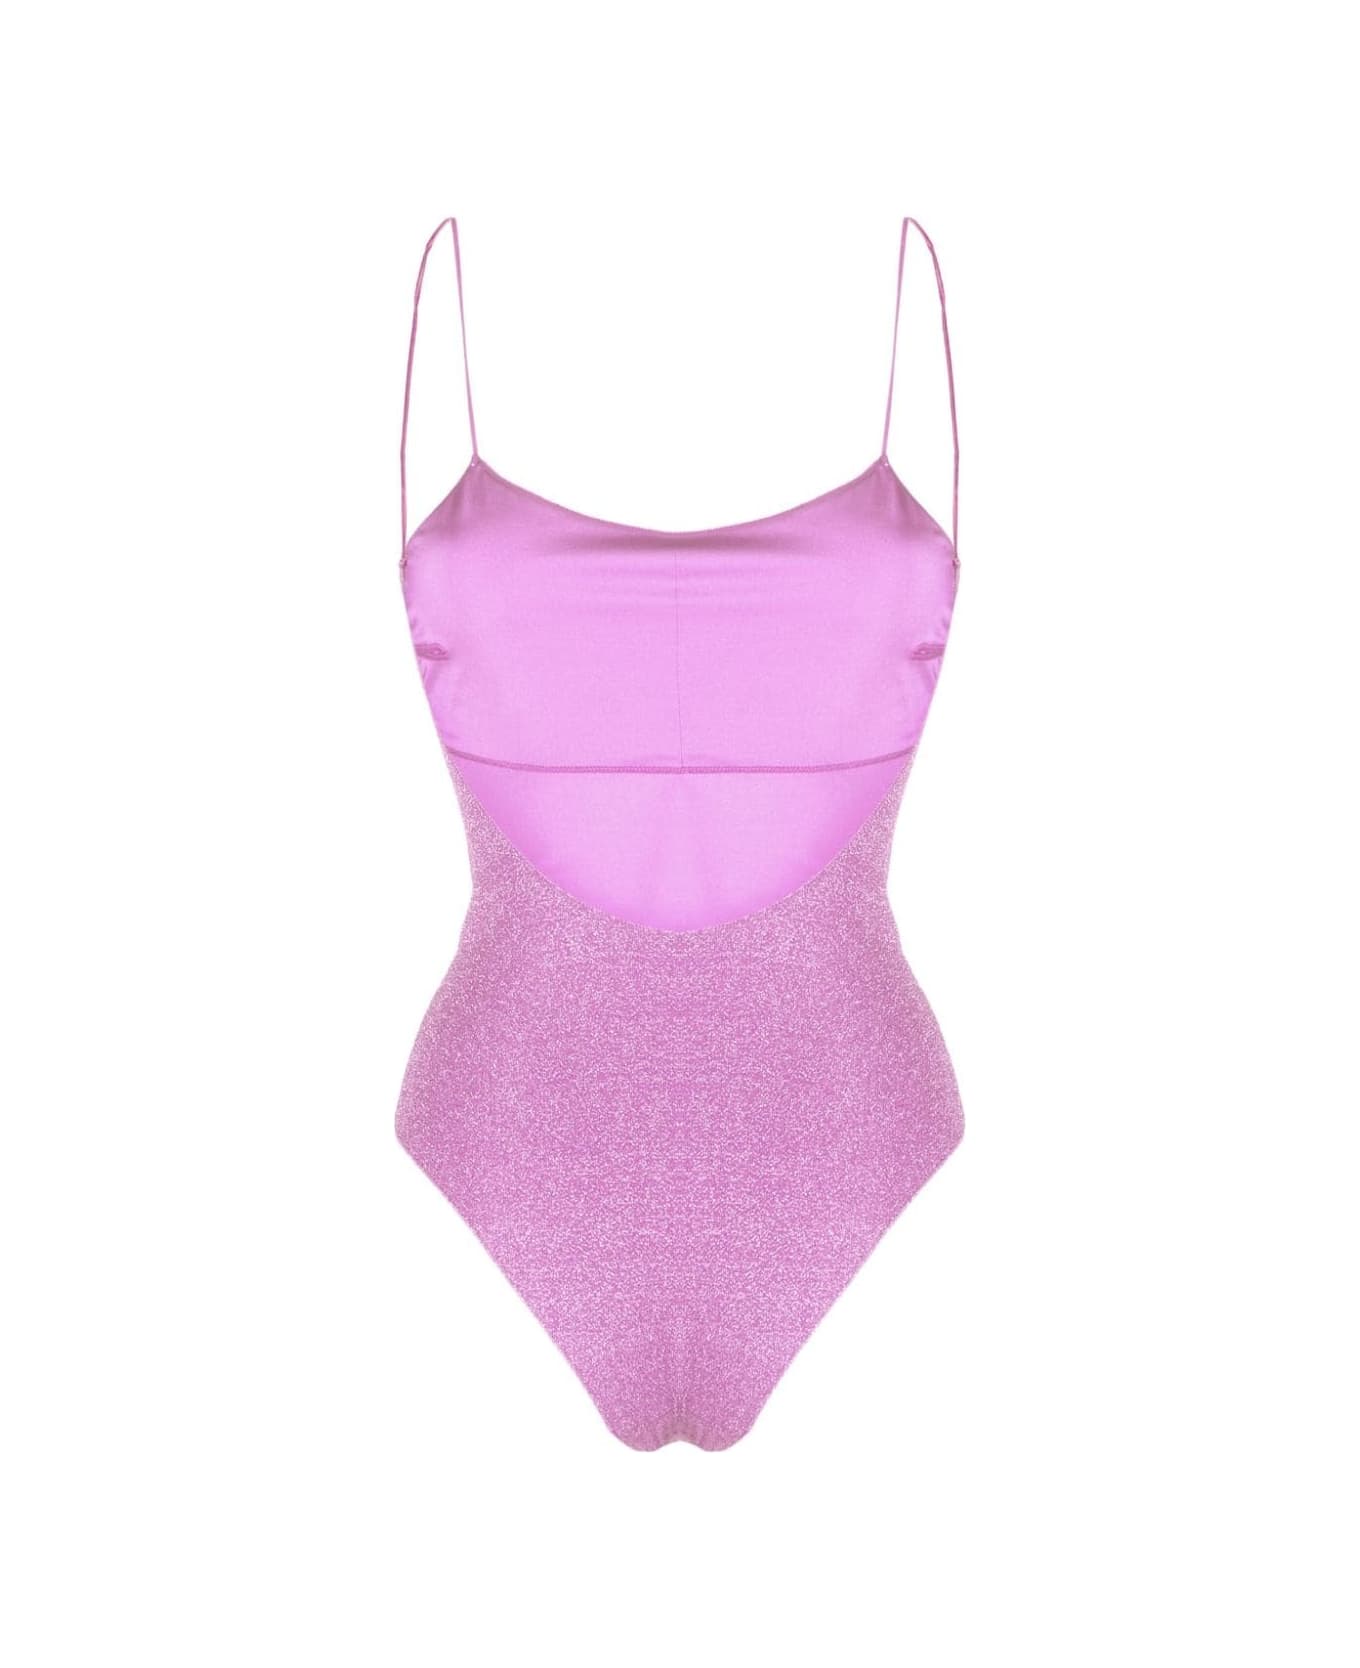 Oseree Wisteria Lumiere Maillot One-piece Swimsuit - Purple